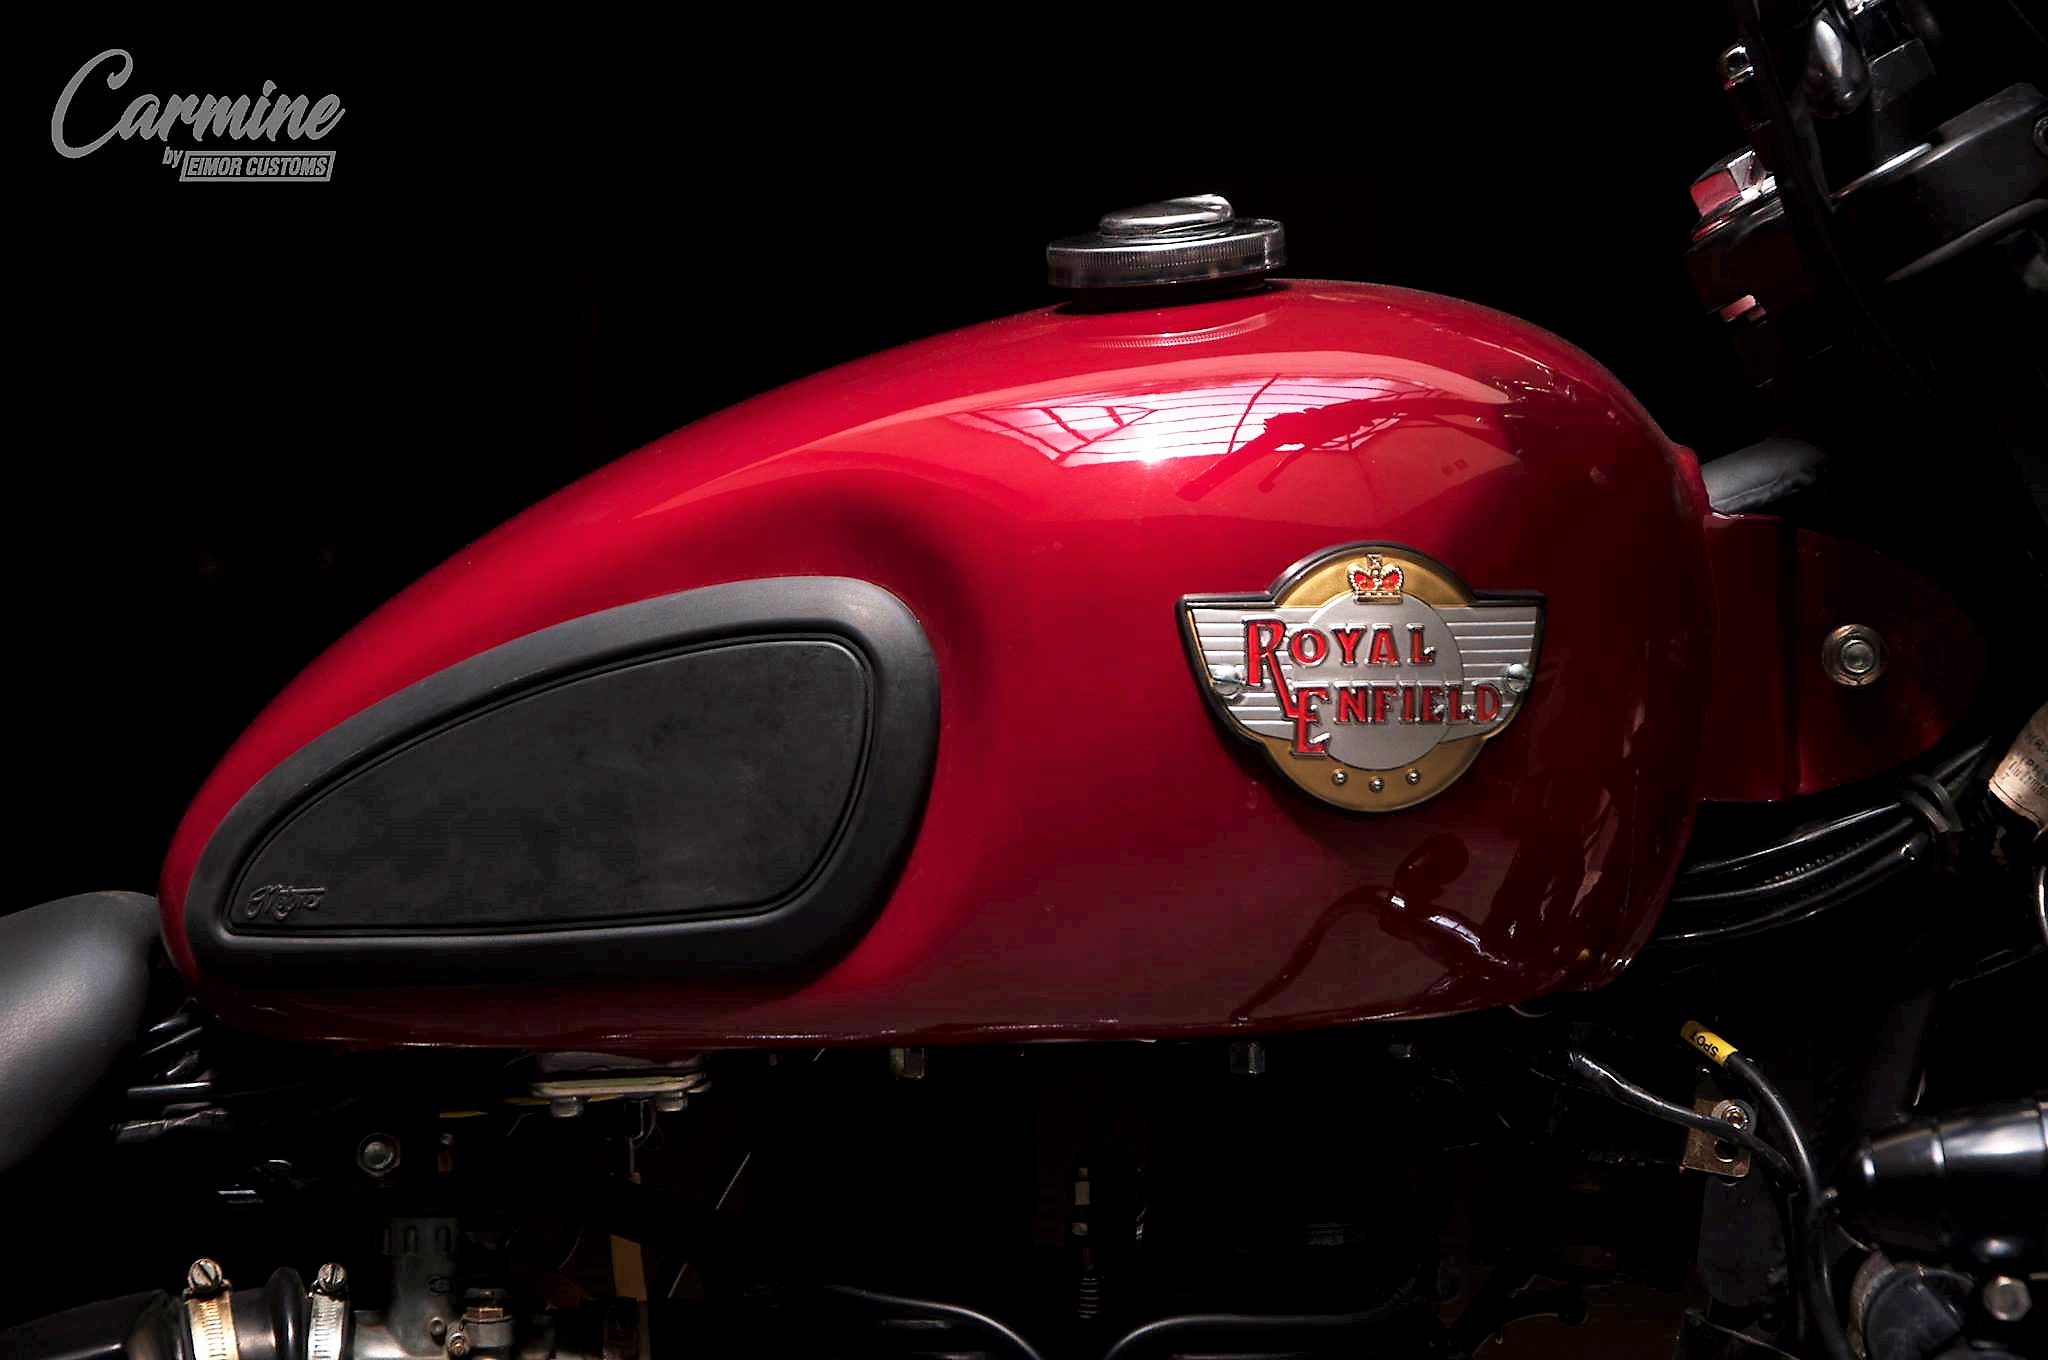 Meet Royal Enfield Carmine 350 Equipped with Premium Parts - closeup